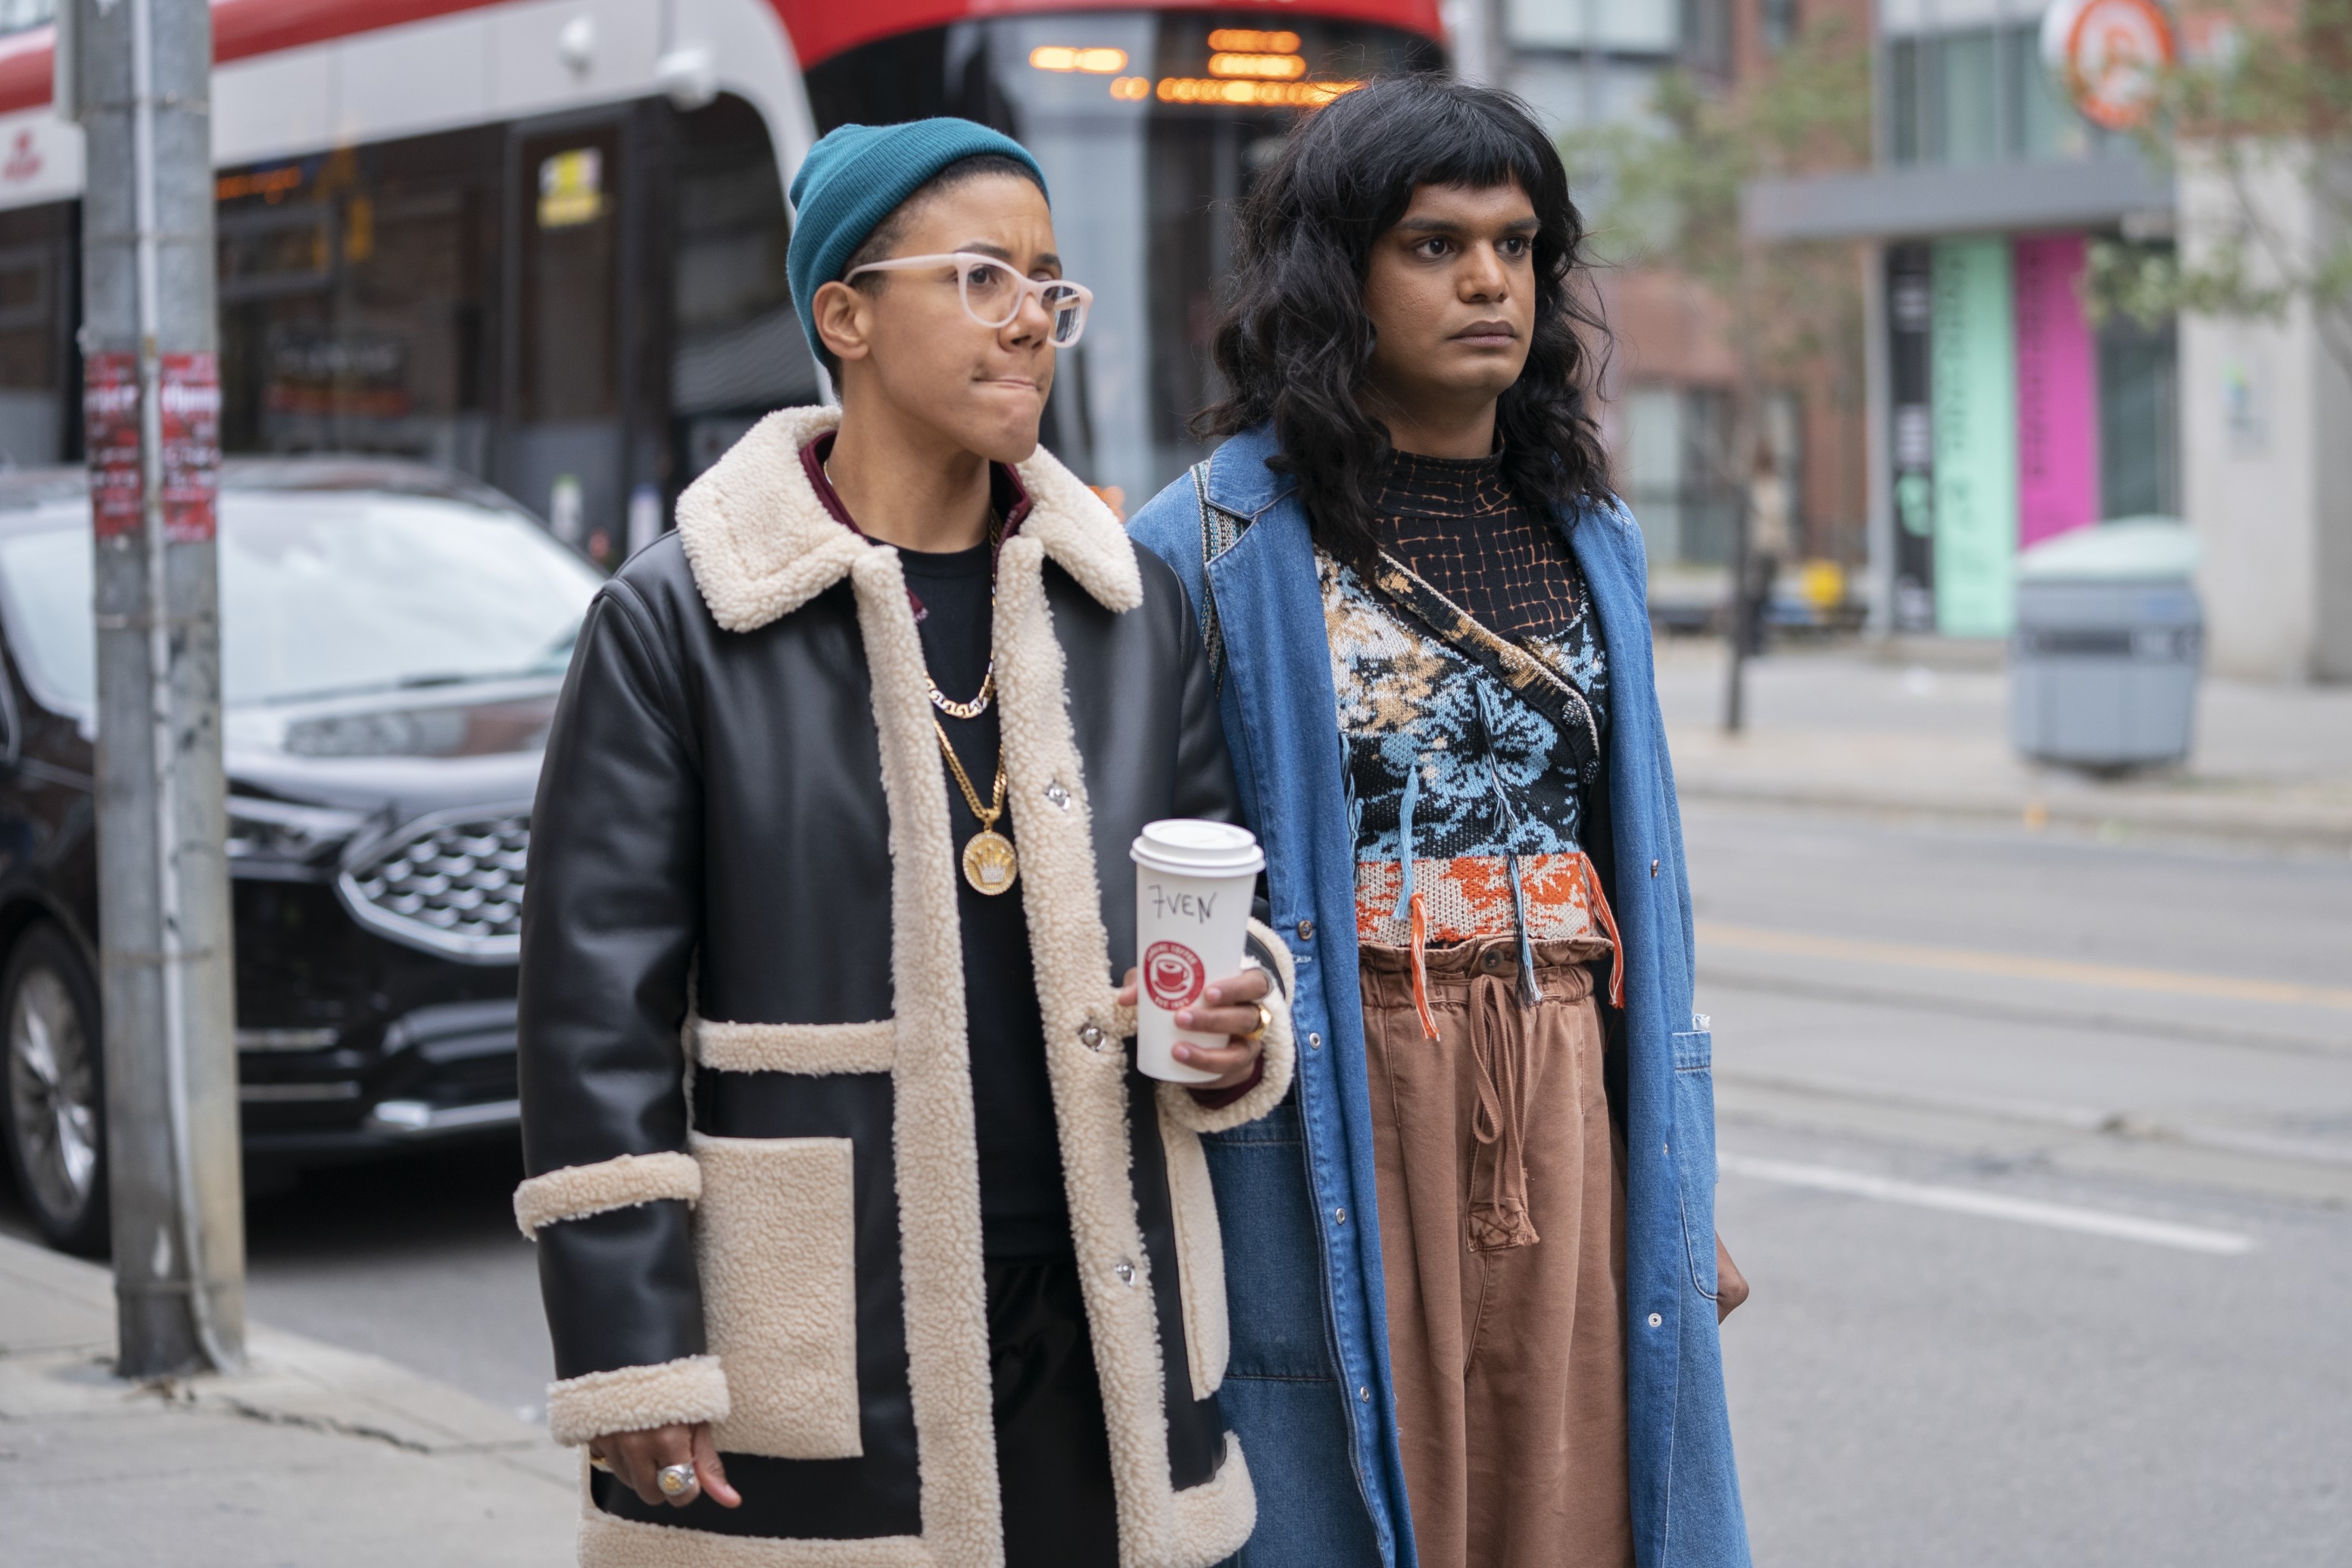 South Asian Fronted Gay-Comedy Sort Of Renewed By CBC And HBO MAX